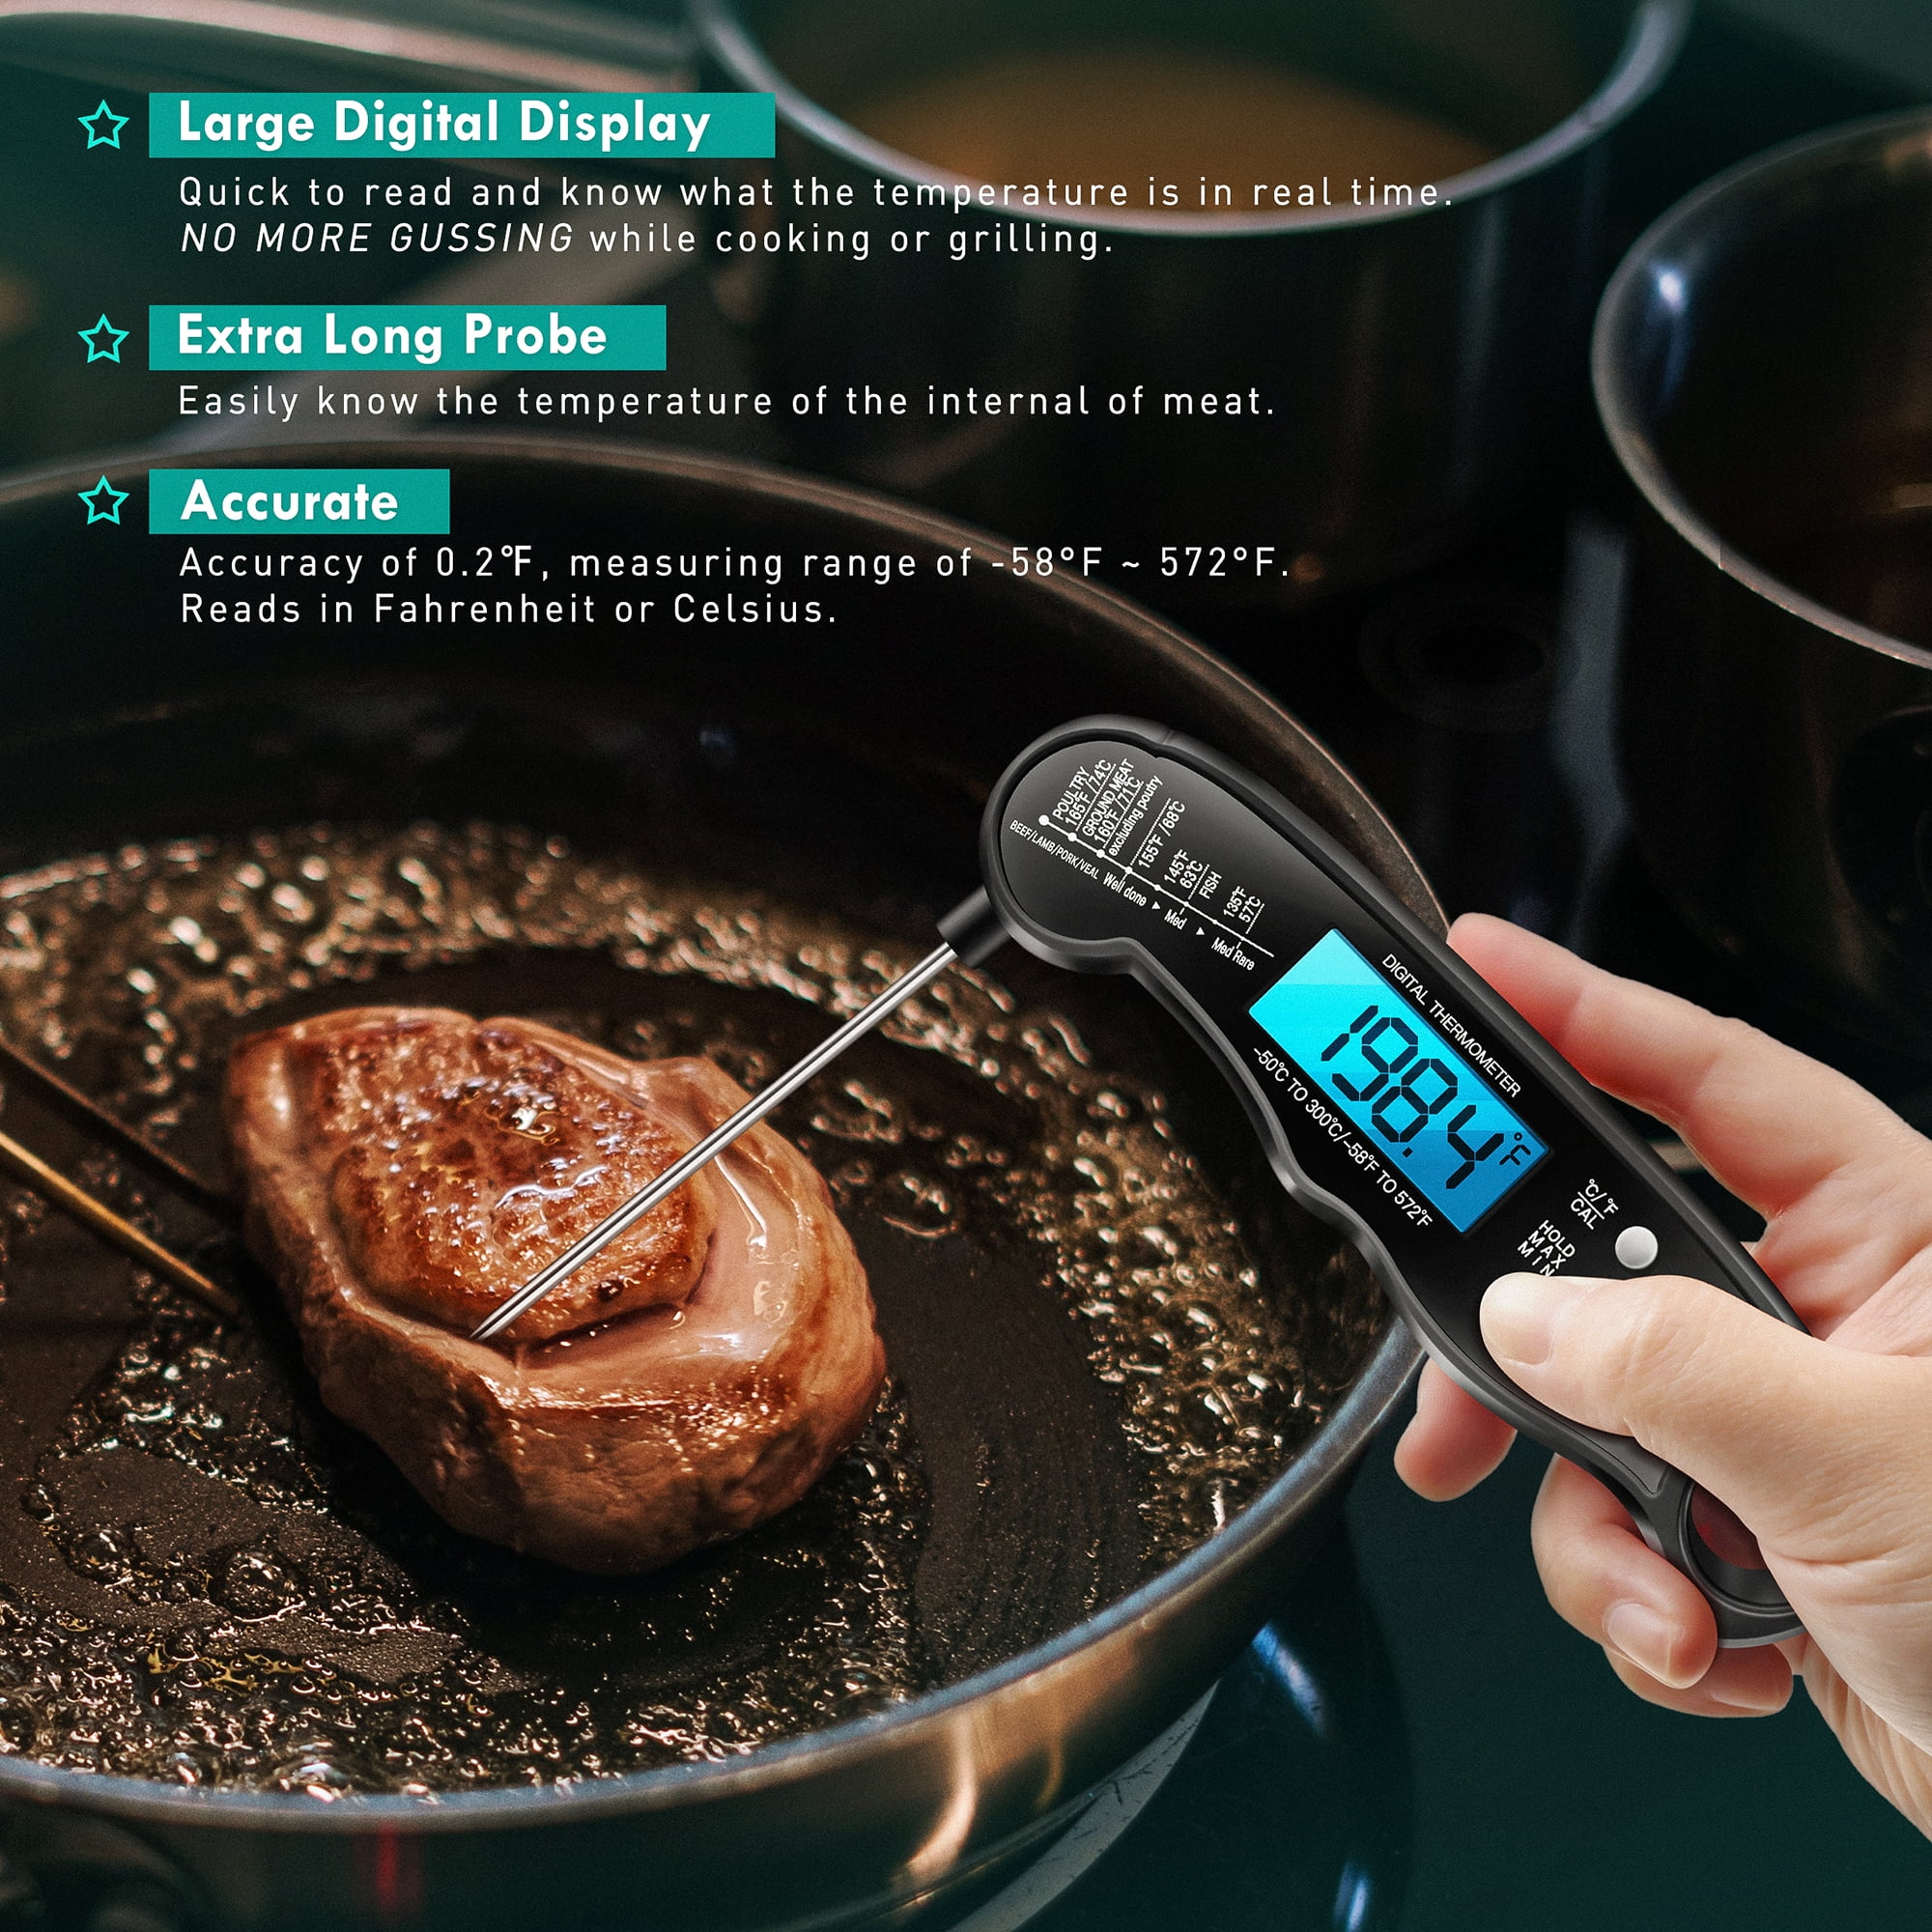 Saferell Instant Read Meat Thermometer for Cooking Review, Best food  thermometer, hands down! 